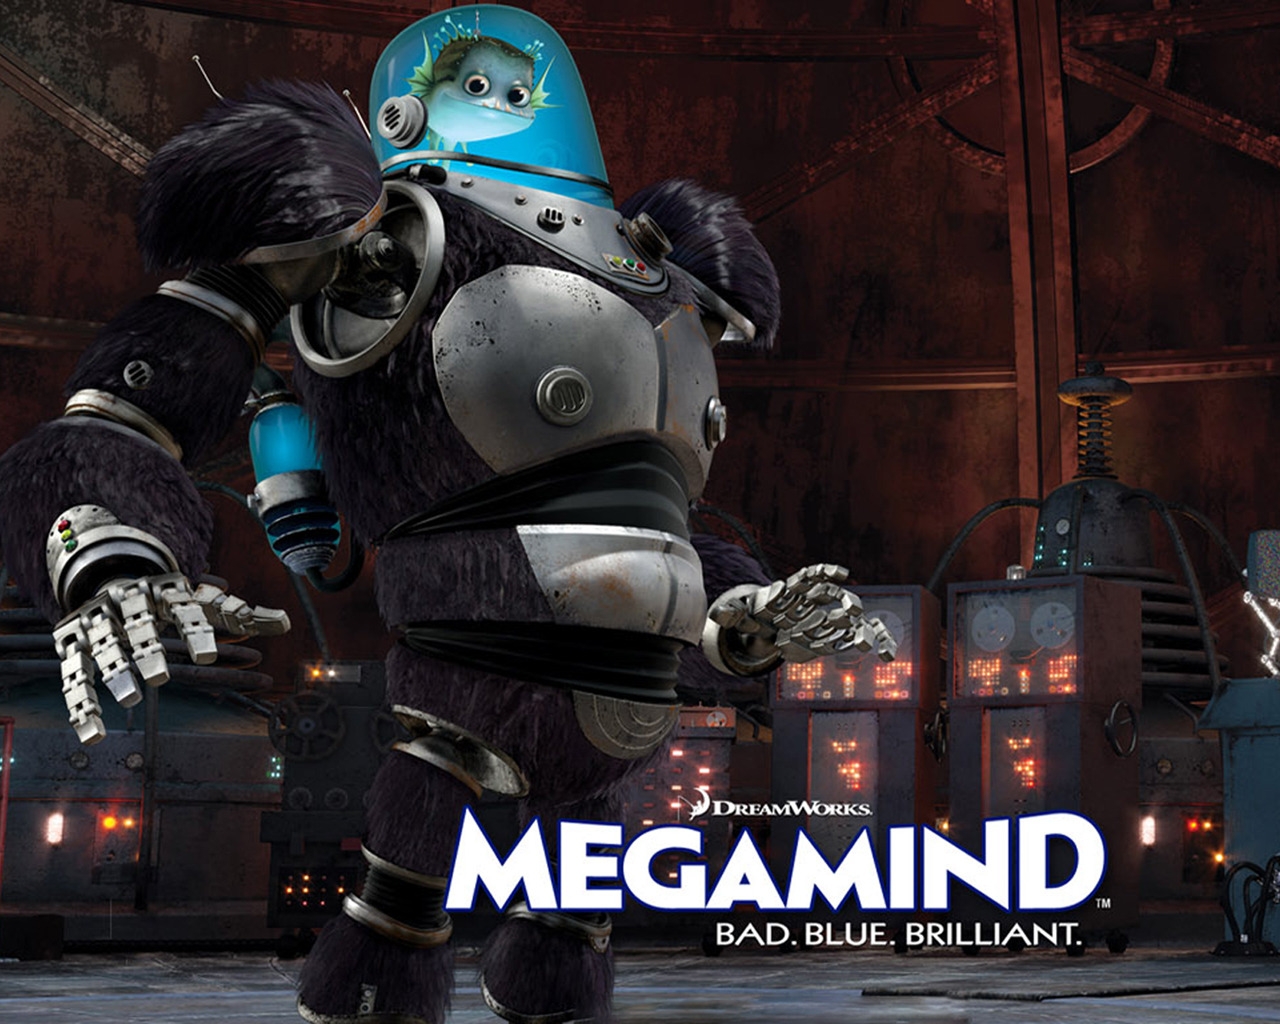 Megamind Minion for 1280 x 1024 resolution